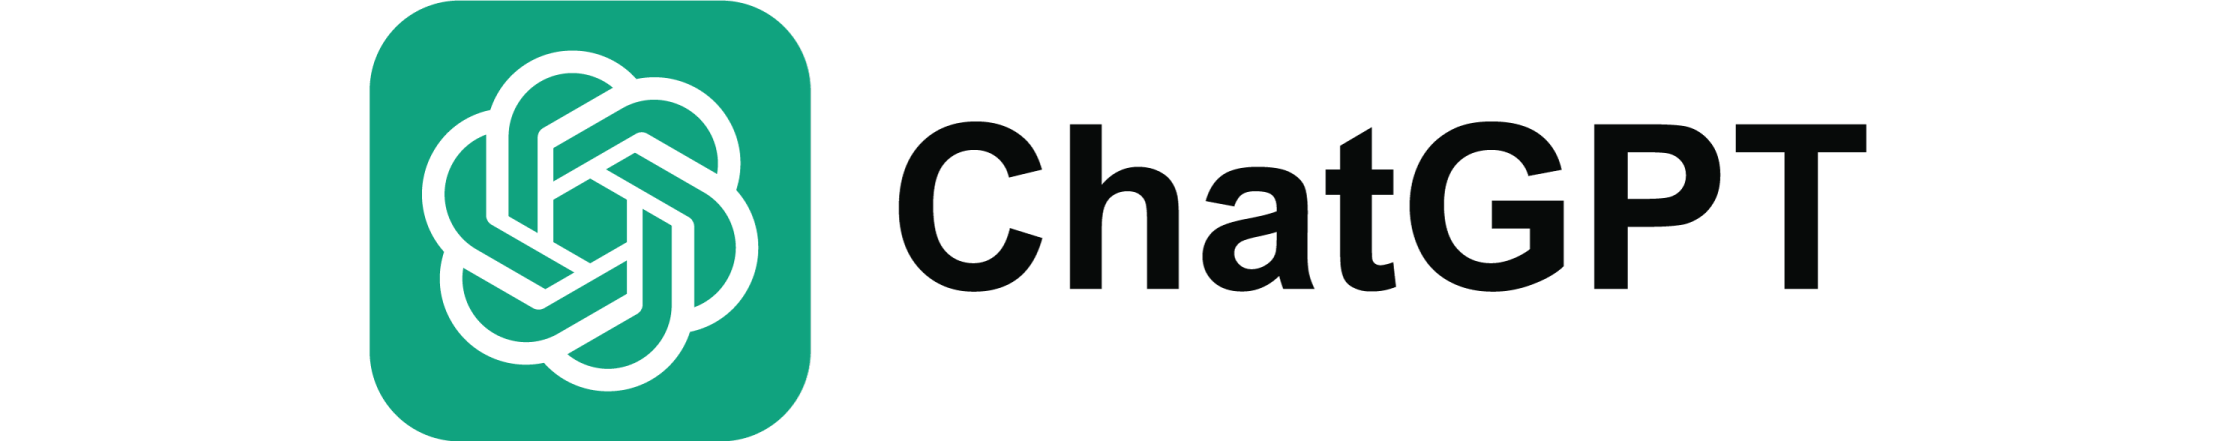 1-01_chatgpt-logo-with-text.png